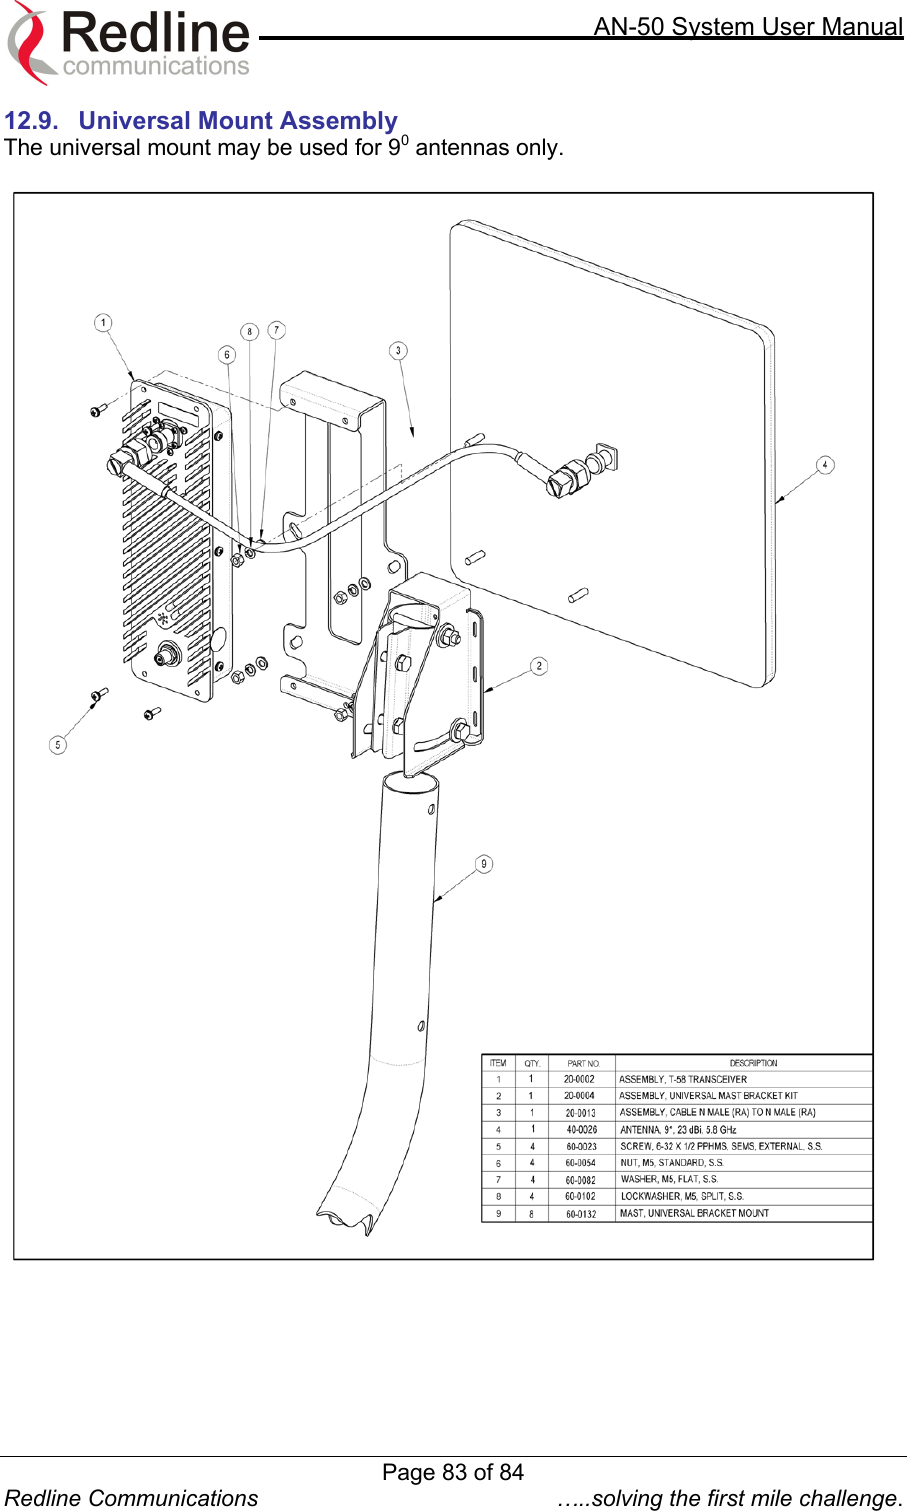     AN-50 System User Manual  Redline Communications  …..solving the first mile challenge. 12.9.  Universal Mount Assembly The universal mount may be used for 90 antennas only.  Page 83 of 84